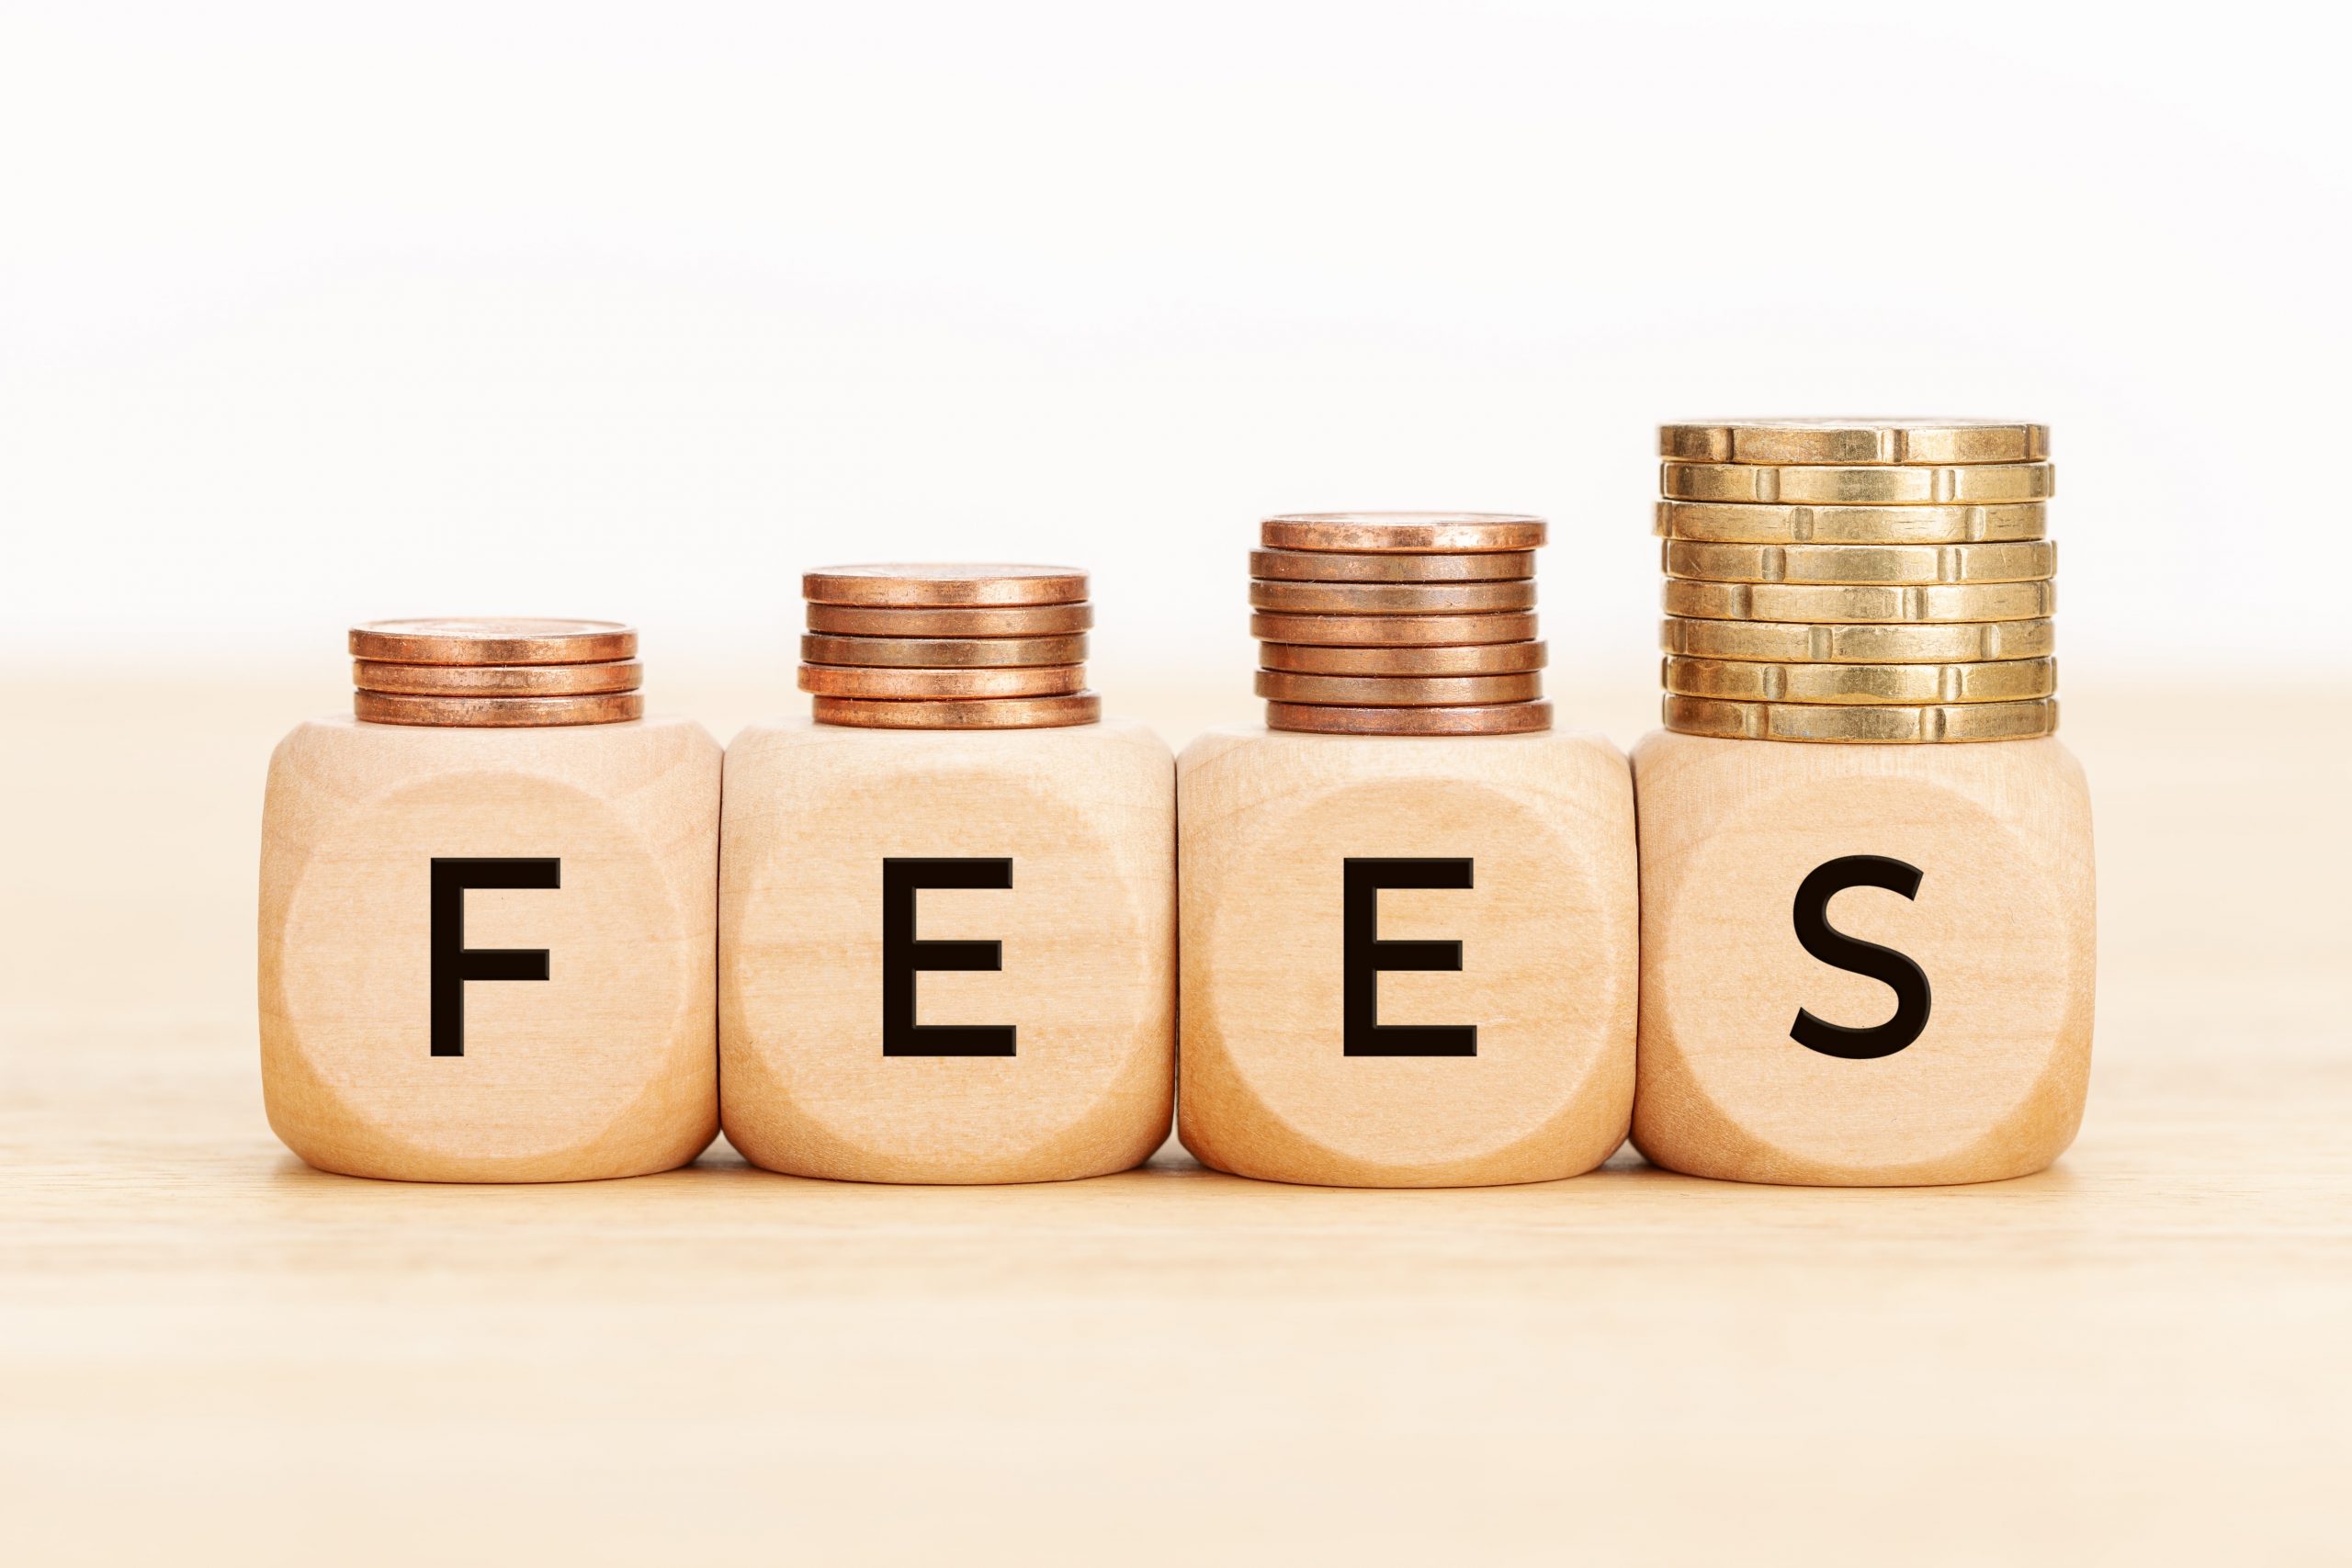 Fees word written on wooden blocks and it shows how automating fees collection is important